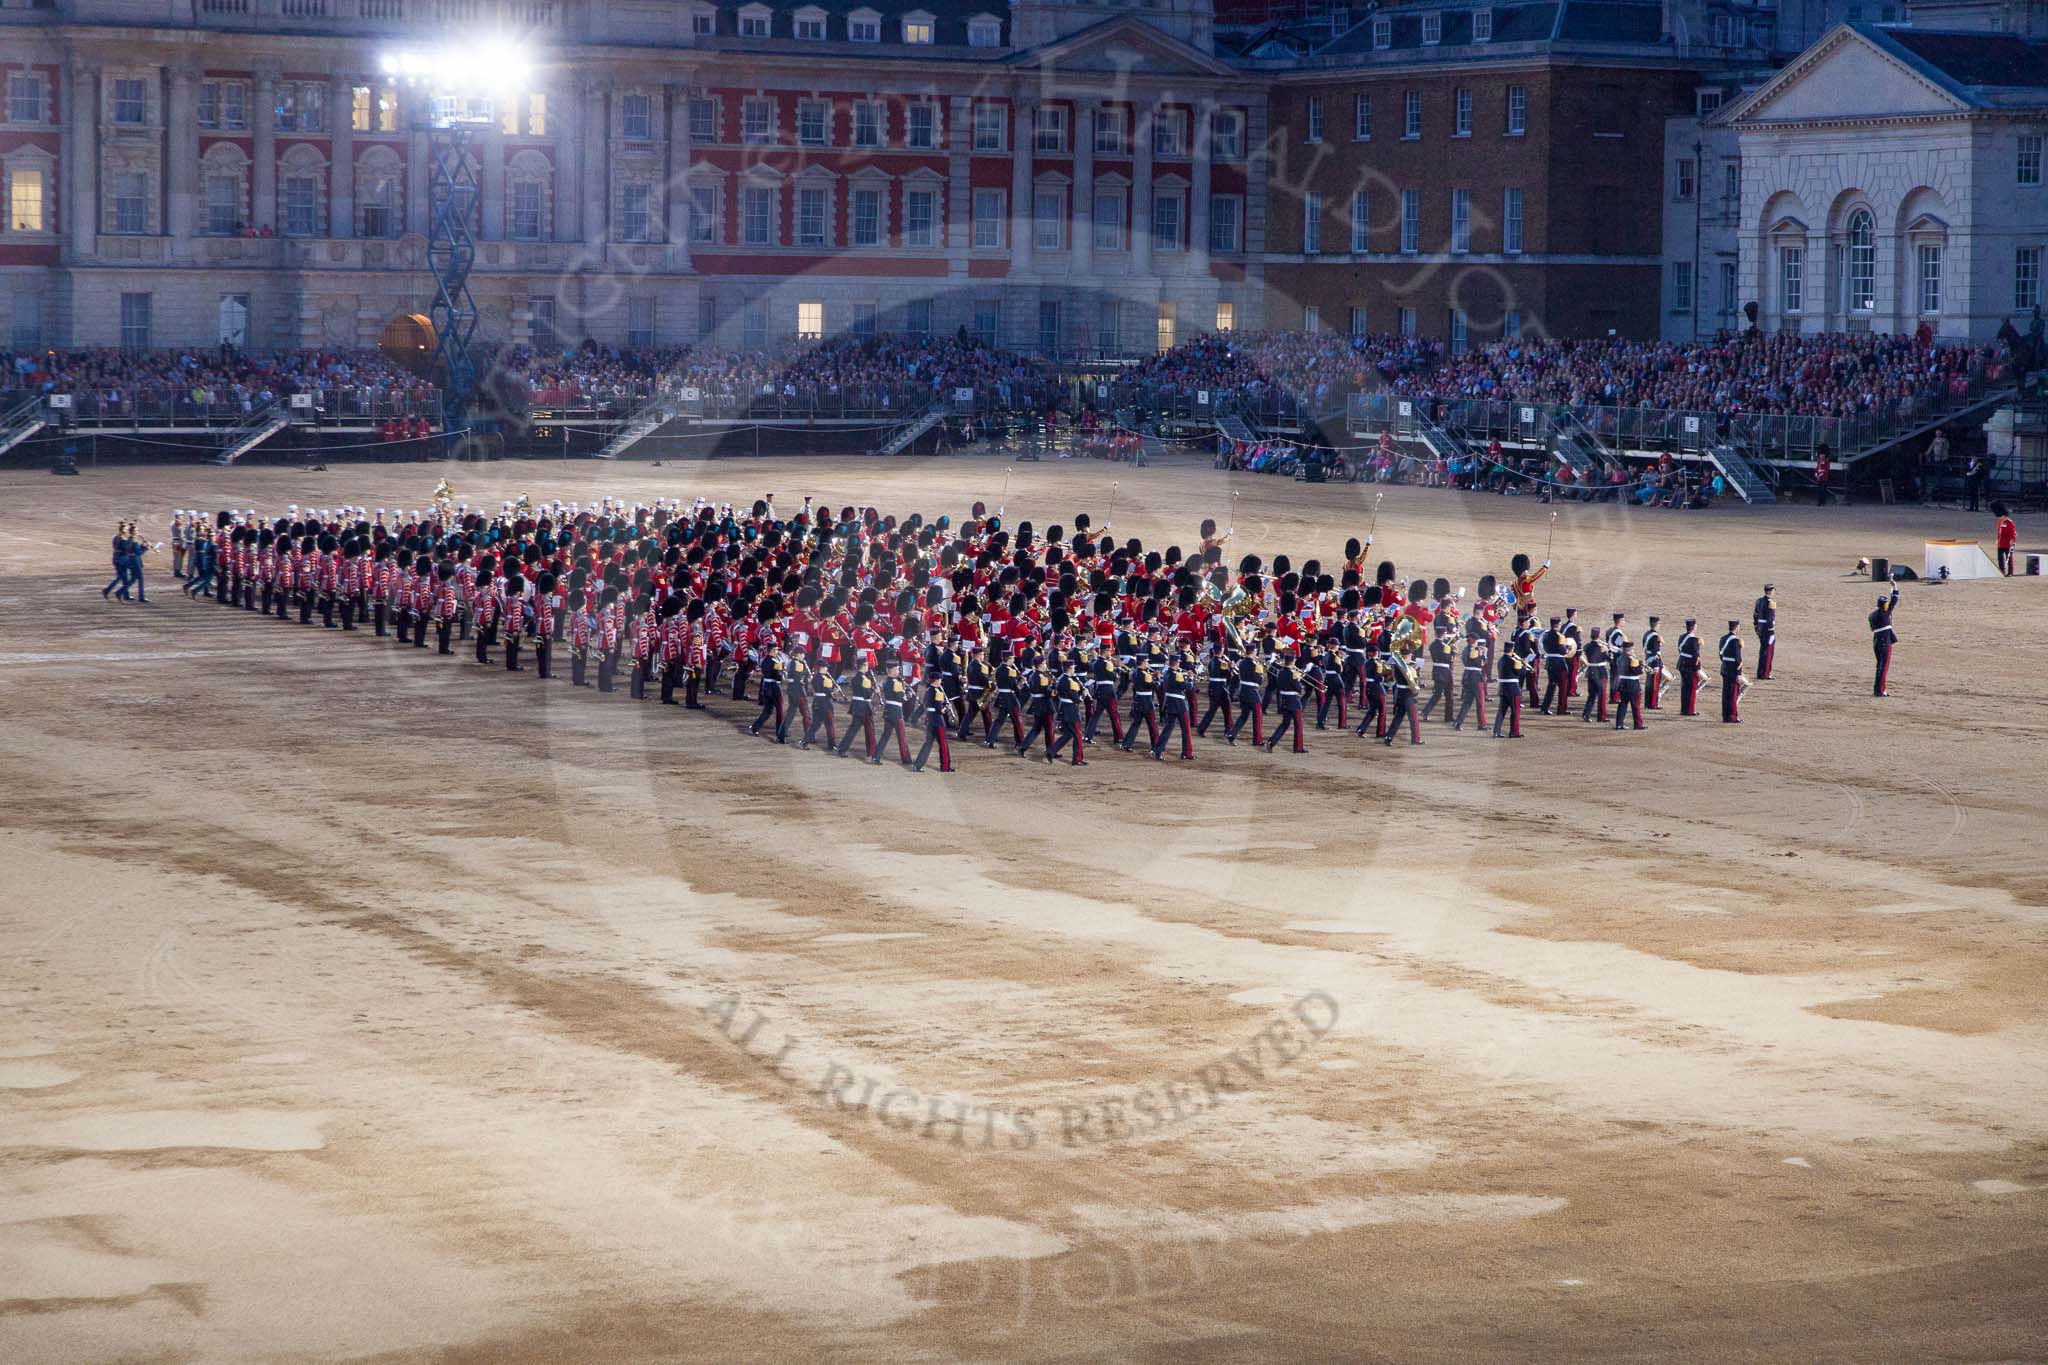 Beating Retreat 2014.
Horse Guards Parade, Westminster,
London SW1A,

United Kingdom,
on 11 June 2014 at 21:39, image #373